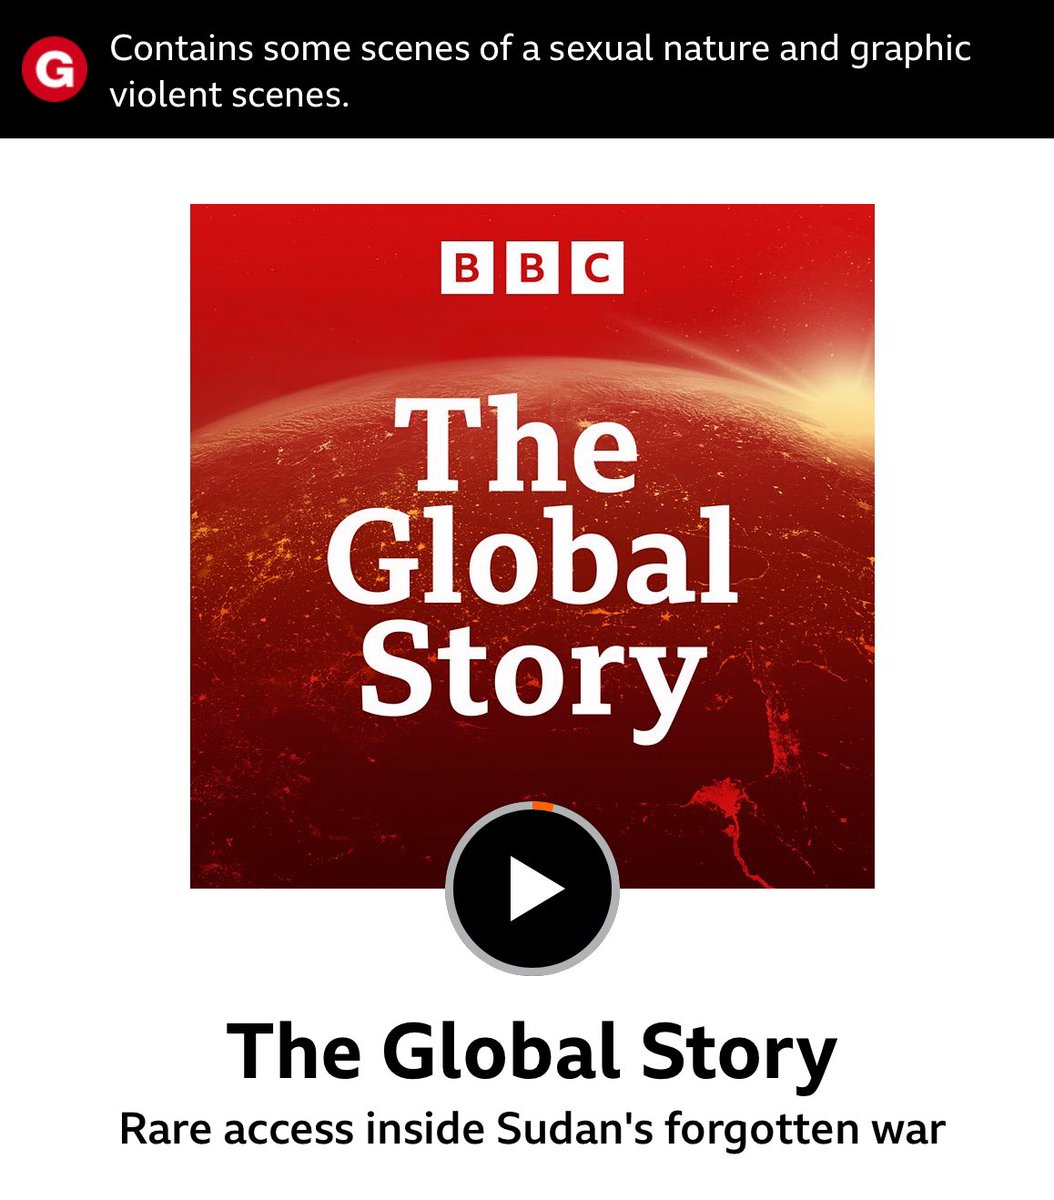 @CliveMyrieBBC @FerasKilaniBBC @Mibrah_ @BBCArabic And do listen to @FerasKilaniBBC & @MercyJuma_ on #TheGlobalStory on @BBCSounds or wherever you get your podcasts . Shocking stories from #Sudan - the “forgotten war”